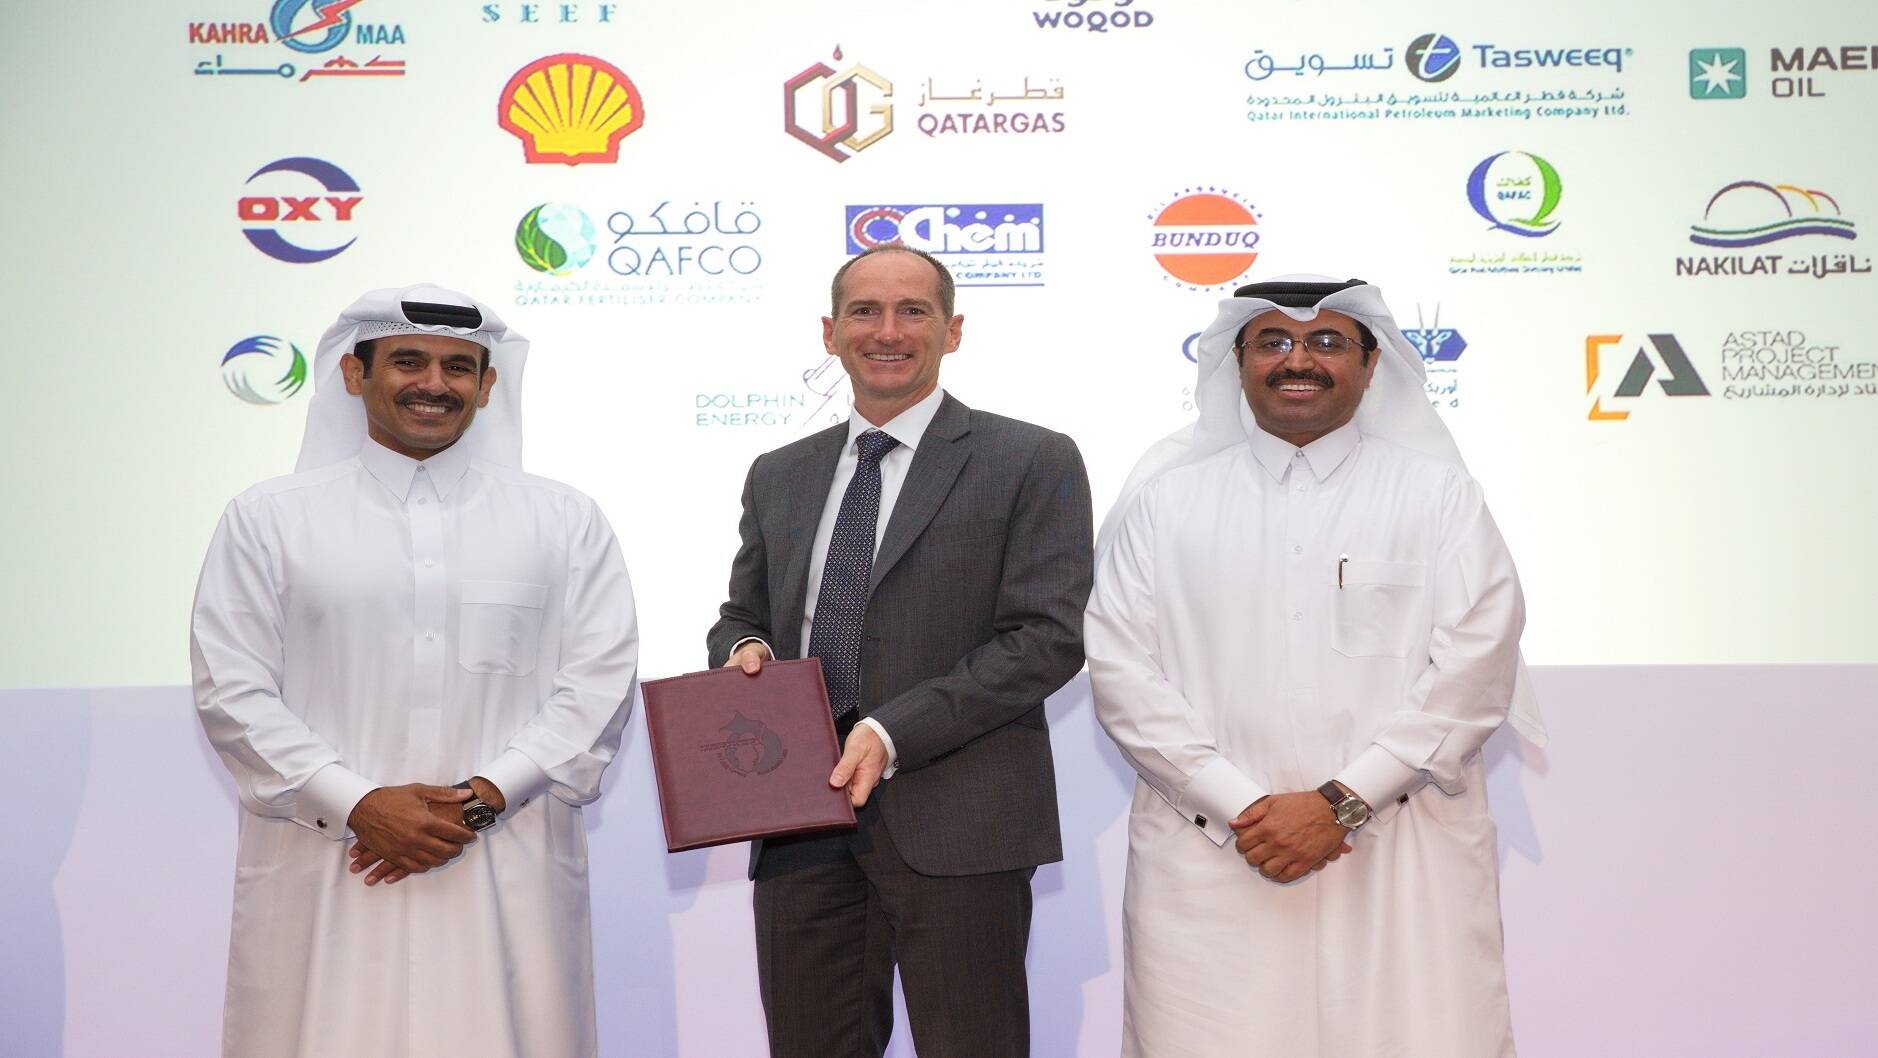 Image Photo — His Excellency Dr. Mohammed Bin Saleh Al-Sada, Minister of Energy and Industry, presented ExxonMobil Qatar with the 2015 Qatarization Certificate for the most improved organization in the category of supporting student sponsorship. Alistair Routledge, President and General Manager for ExxonMobil Qatar, accepted the award on behalf of the company.